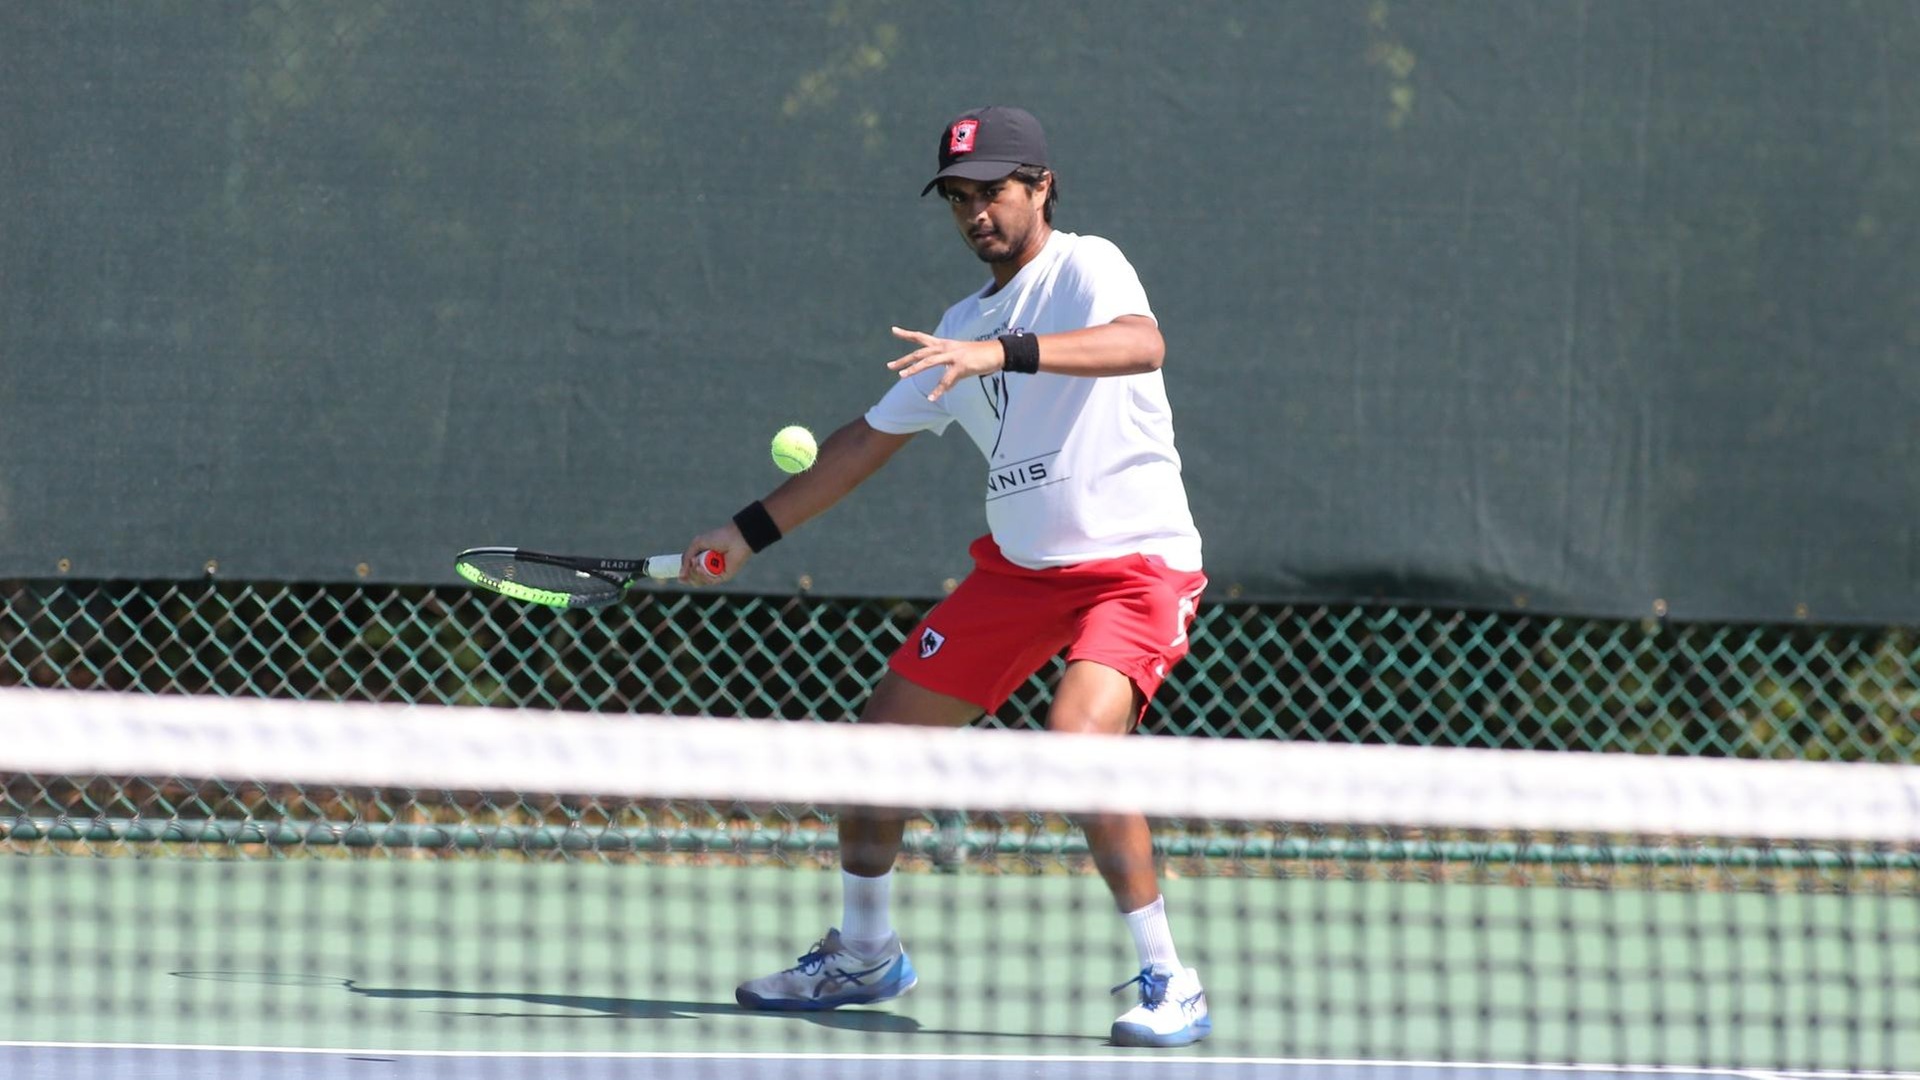 men's tennis player wearing a white shirt, red shorts, and black hat swings at a ball